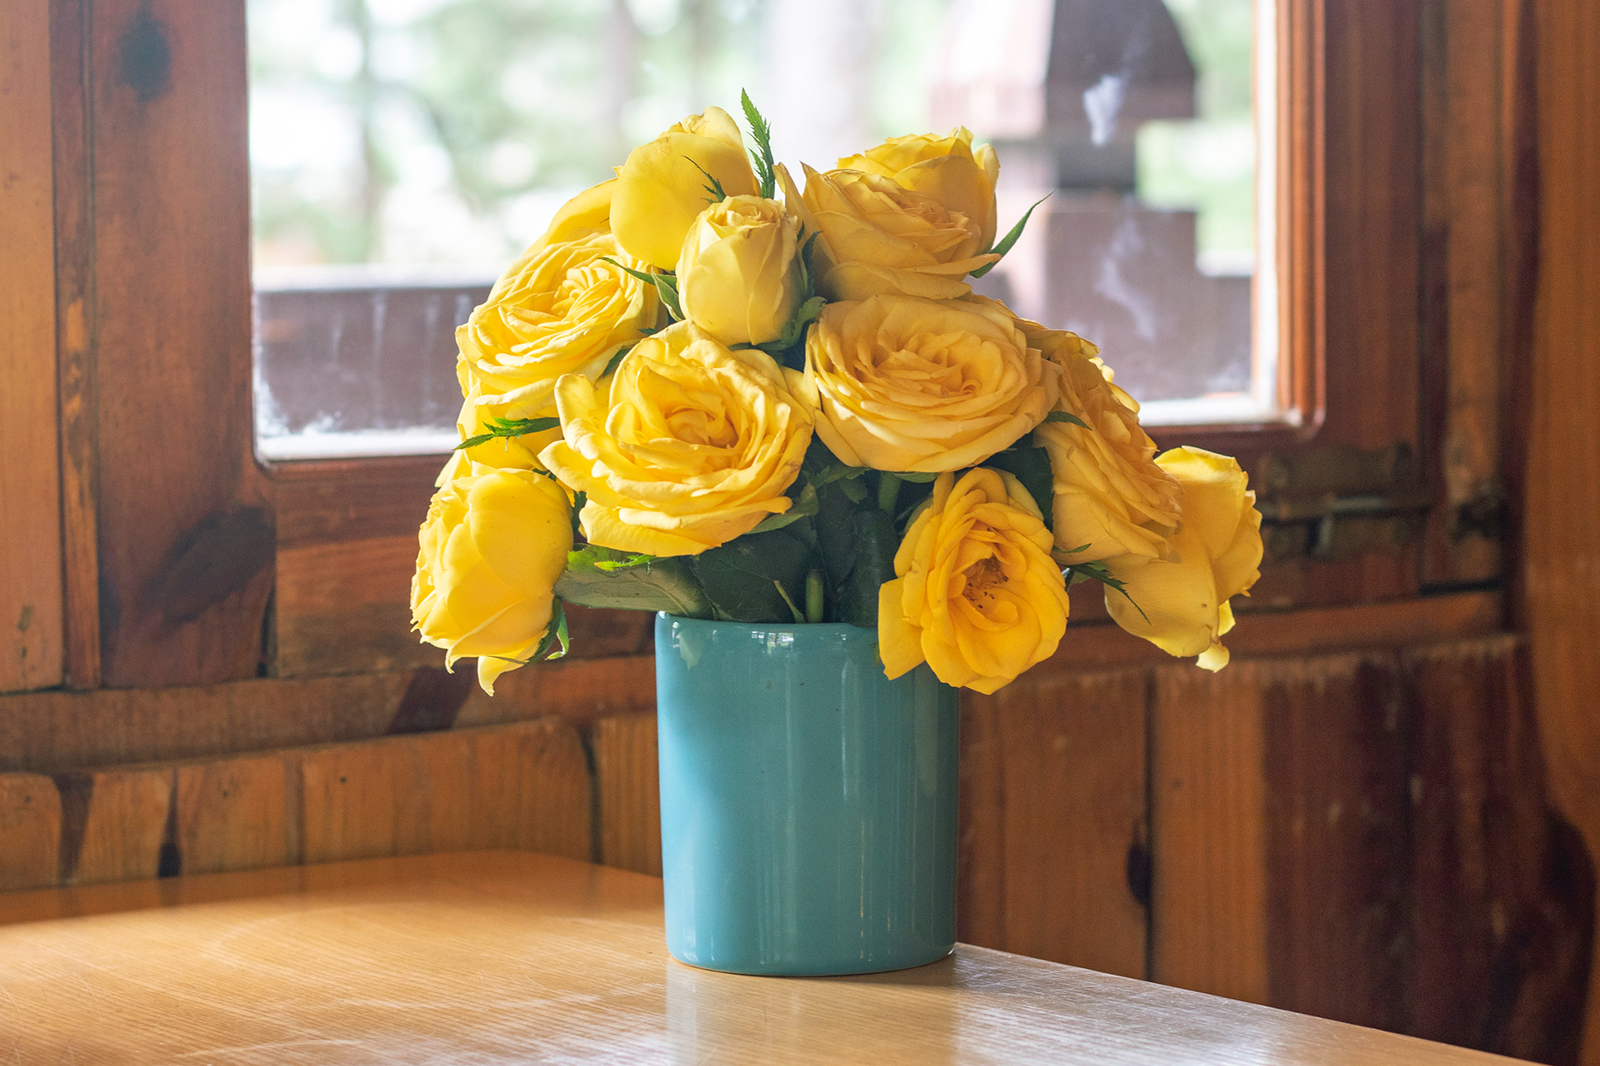 <p>  Although the Victorians popularized using flowers to send messages to your loved ones, the practice has been going on for much longer. Yellow roses are the most notorious of the friend flowers, though <a href="https://www.lovetoknow.com/home/garden/meaning-symbolism-different-color-tulip-flowers" title="Meaning and Symbolism of Different Color Tulip Flowers">orange tulips</a>, sunflowers, and daisies are also common choices. </p> <p>  Everyone loves finding a surprise bouquet at their front door, and there's no better way to show your friends you love and appreciate them than with a cheerful and bright colored flower arrangement. </p>